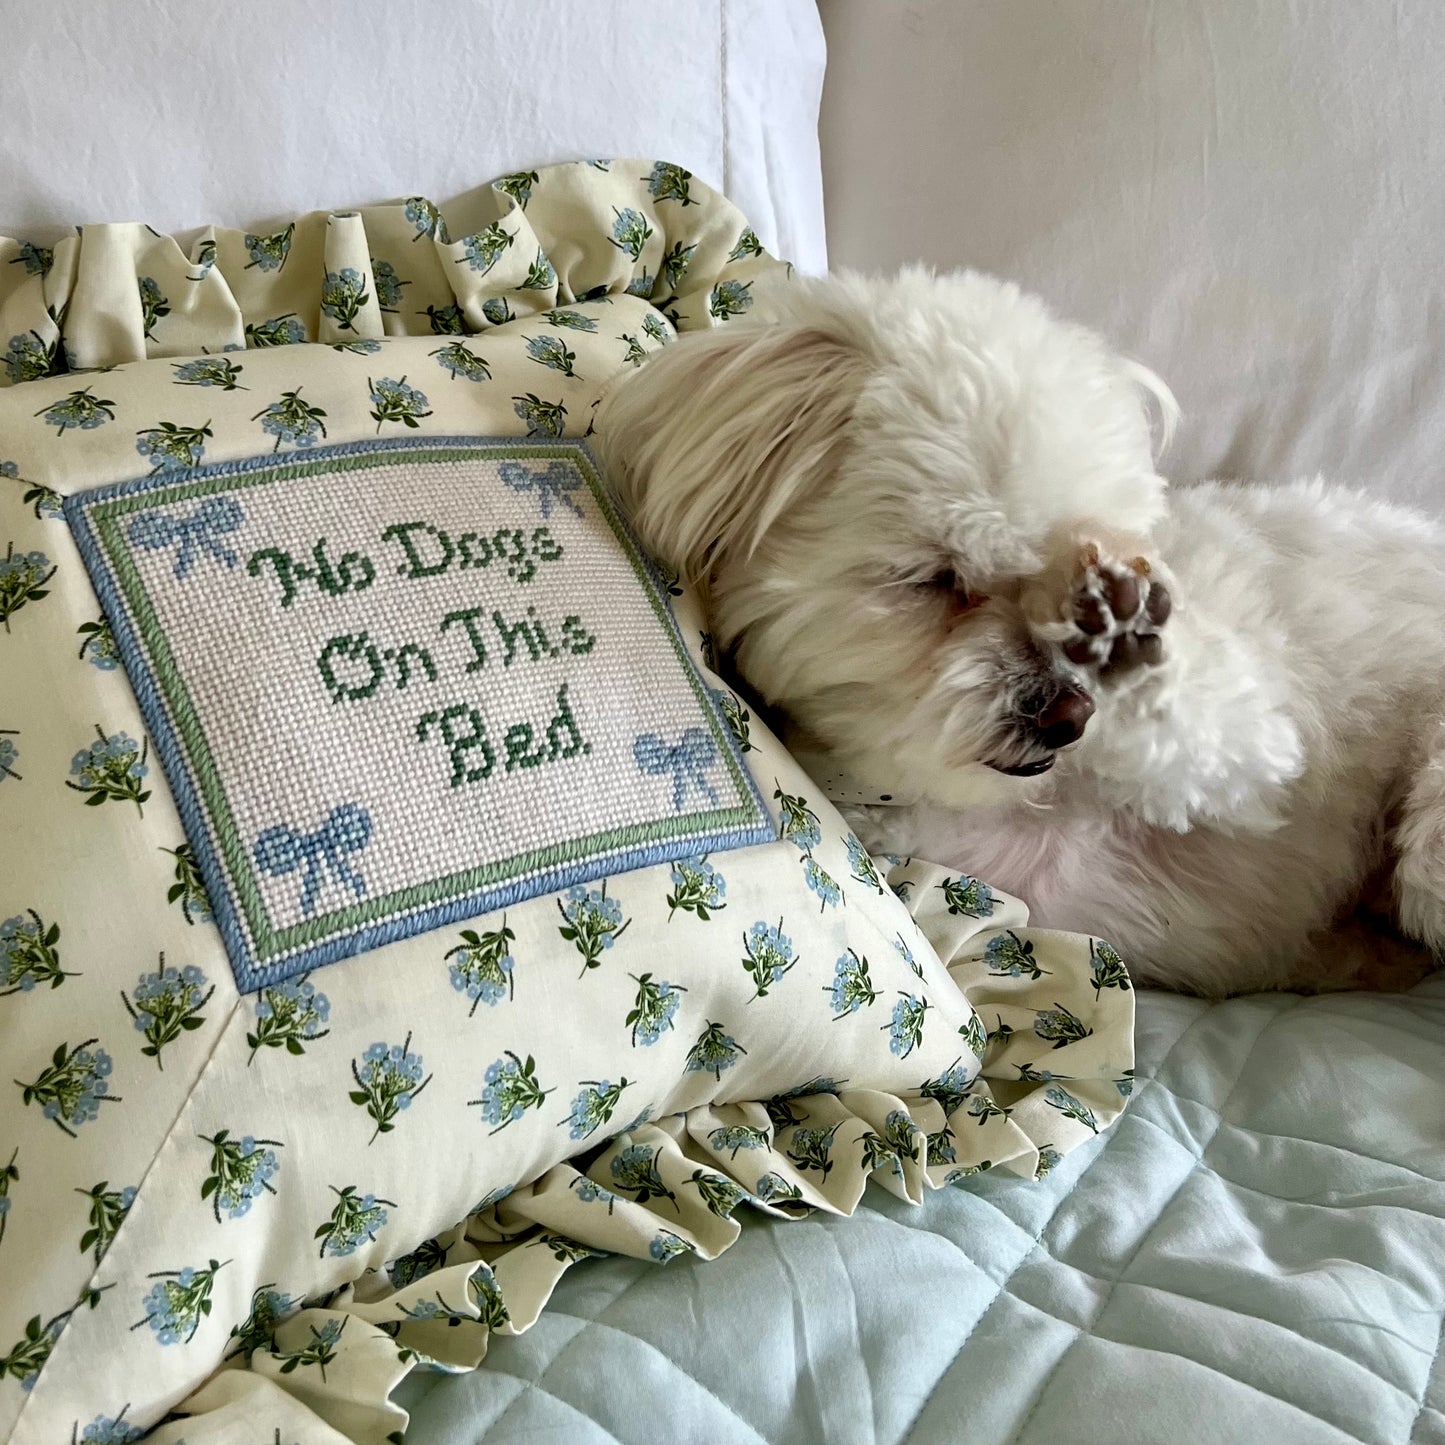 No Dogs on this Bed